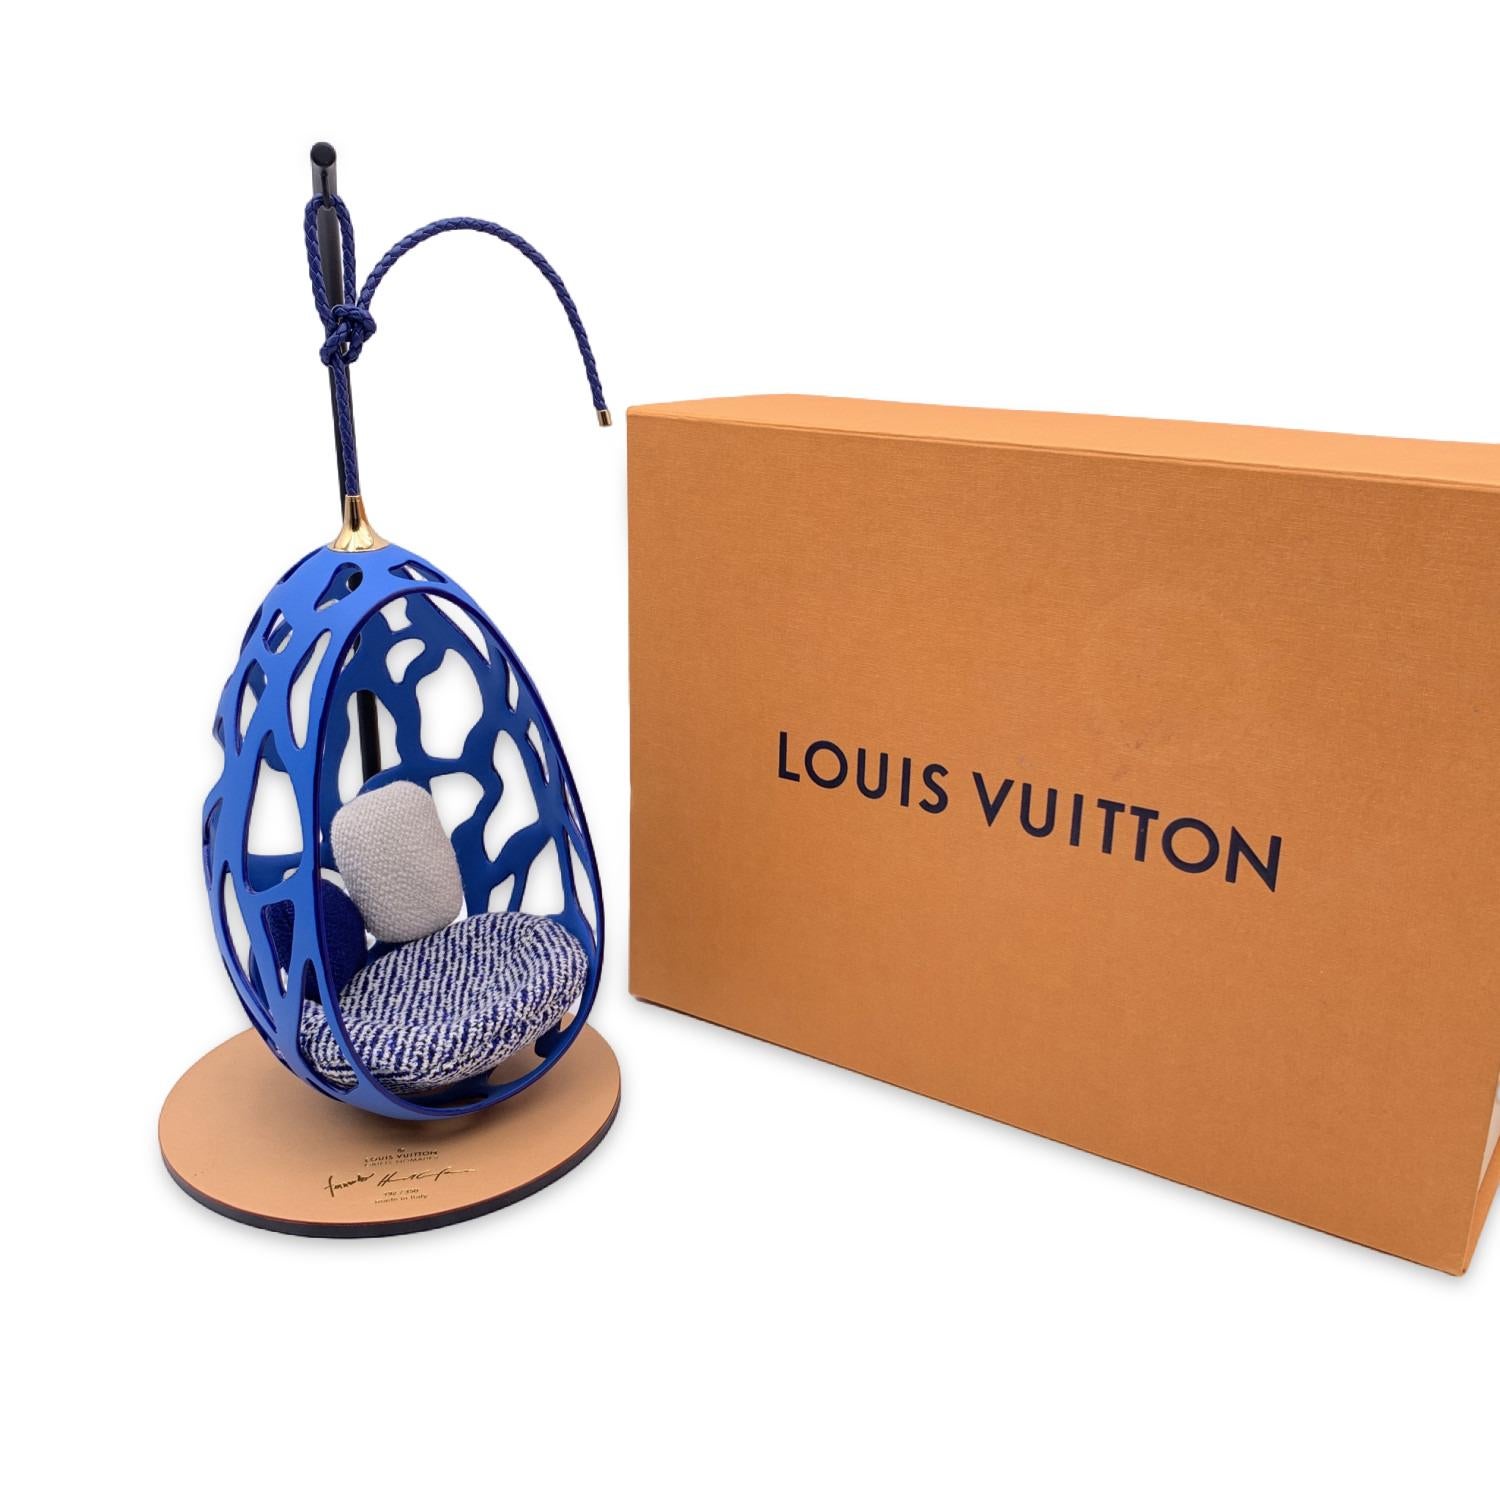 Purple Louis Vuitton Limited Ed Cocoon Campana Miniature Chair Collectible